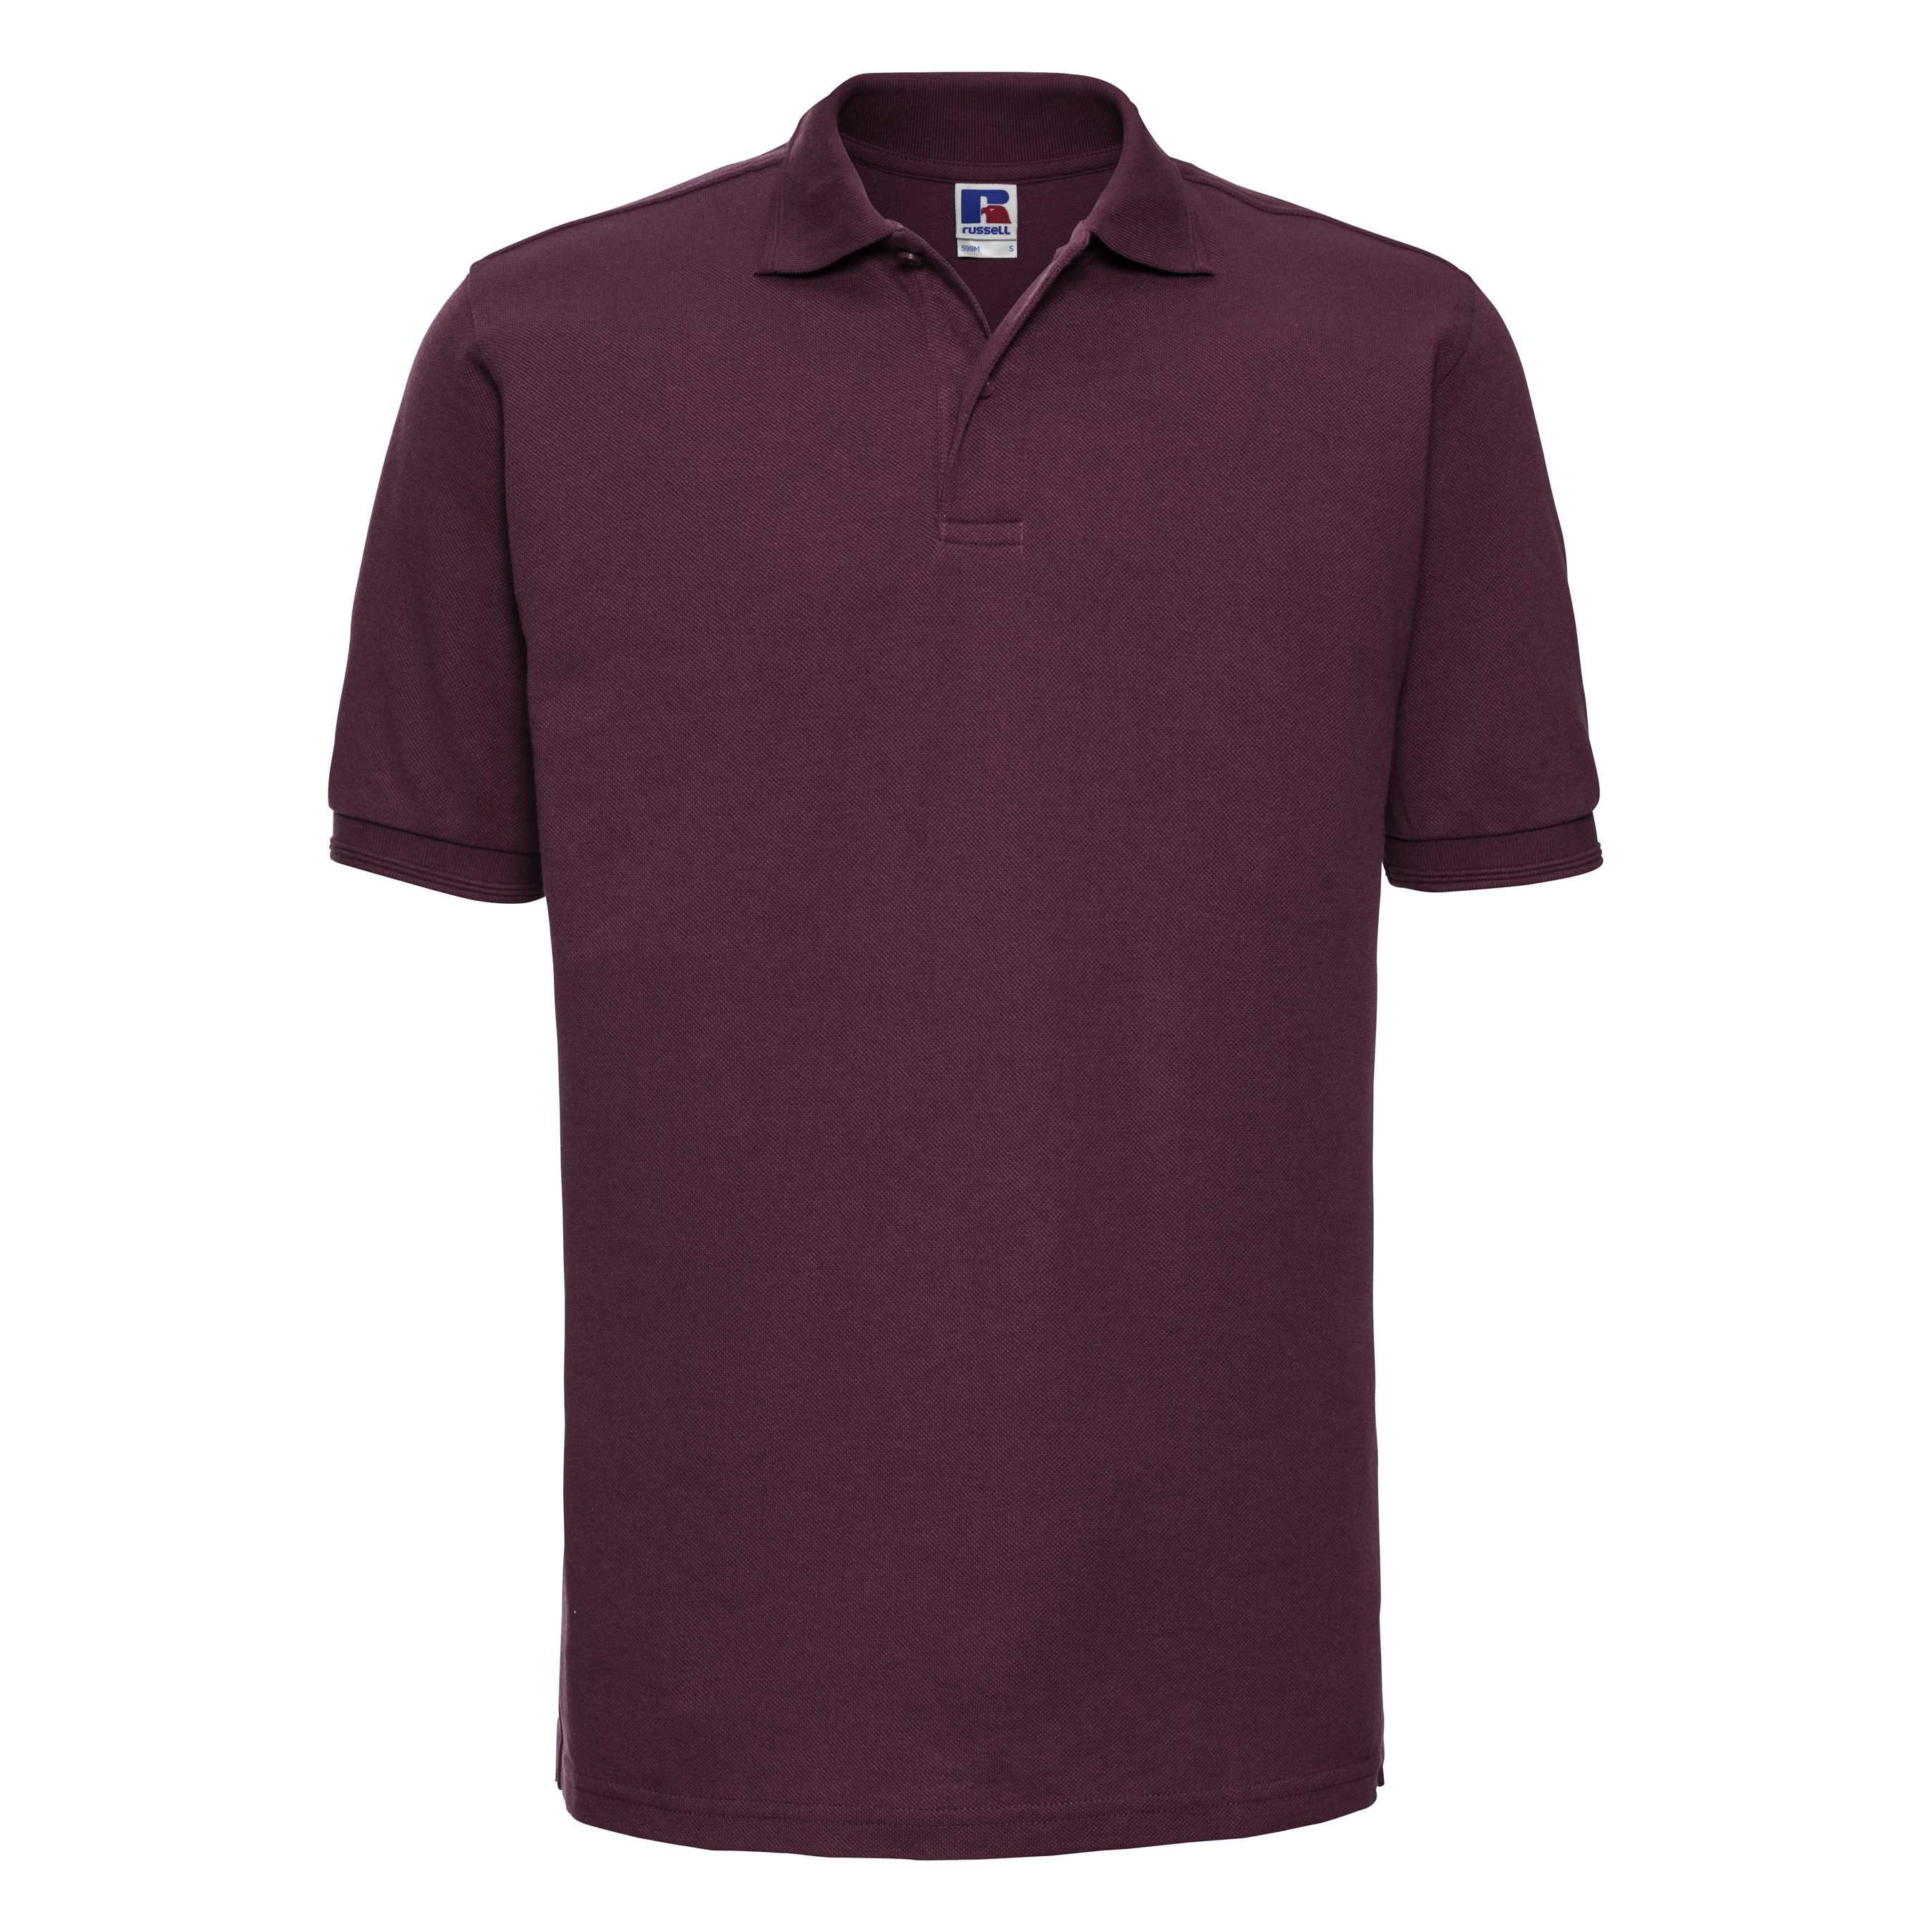 ax-httpswebsystems.s3.amazonaws.comtmp_for_downloadrussell-hardwearing-wash-polo-burgundy.jpg